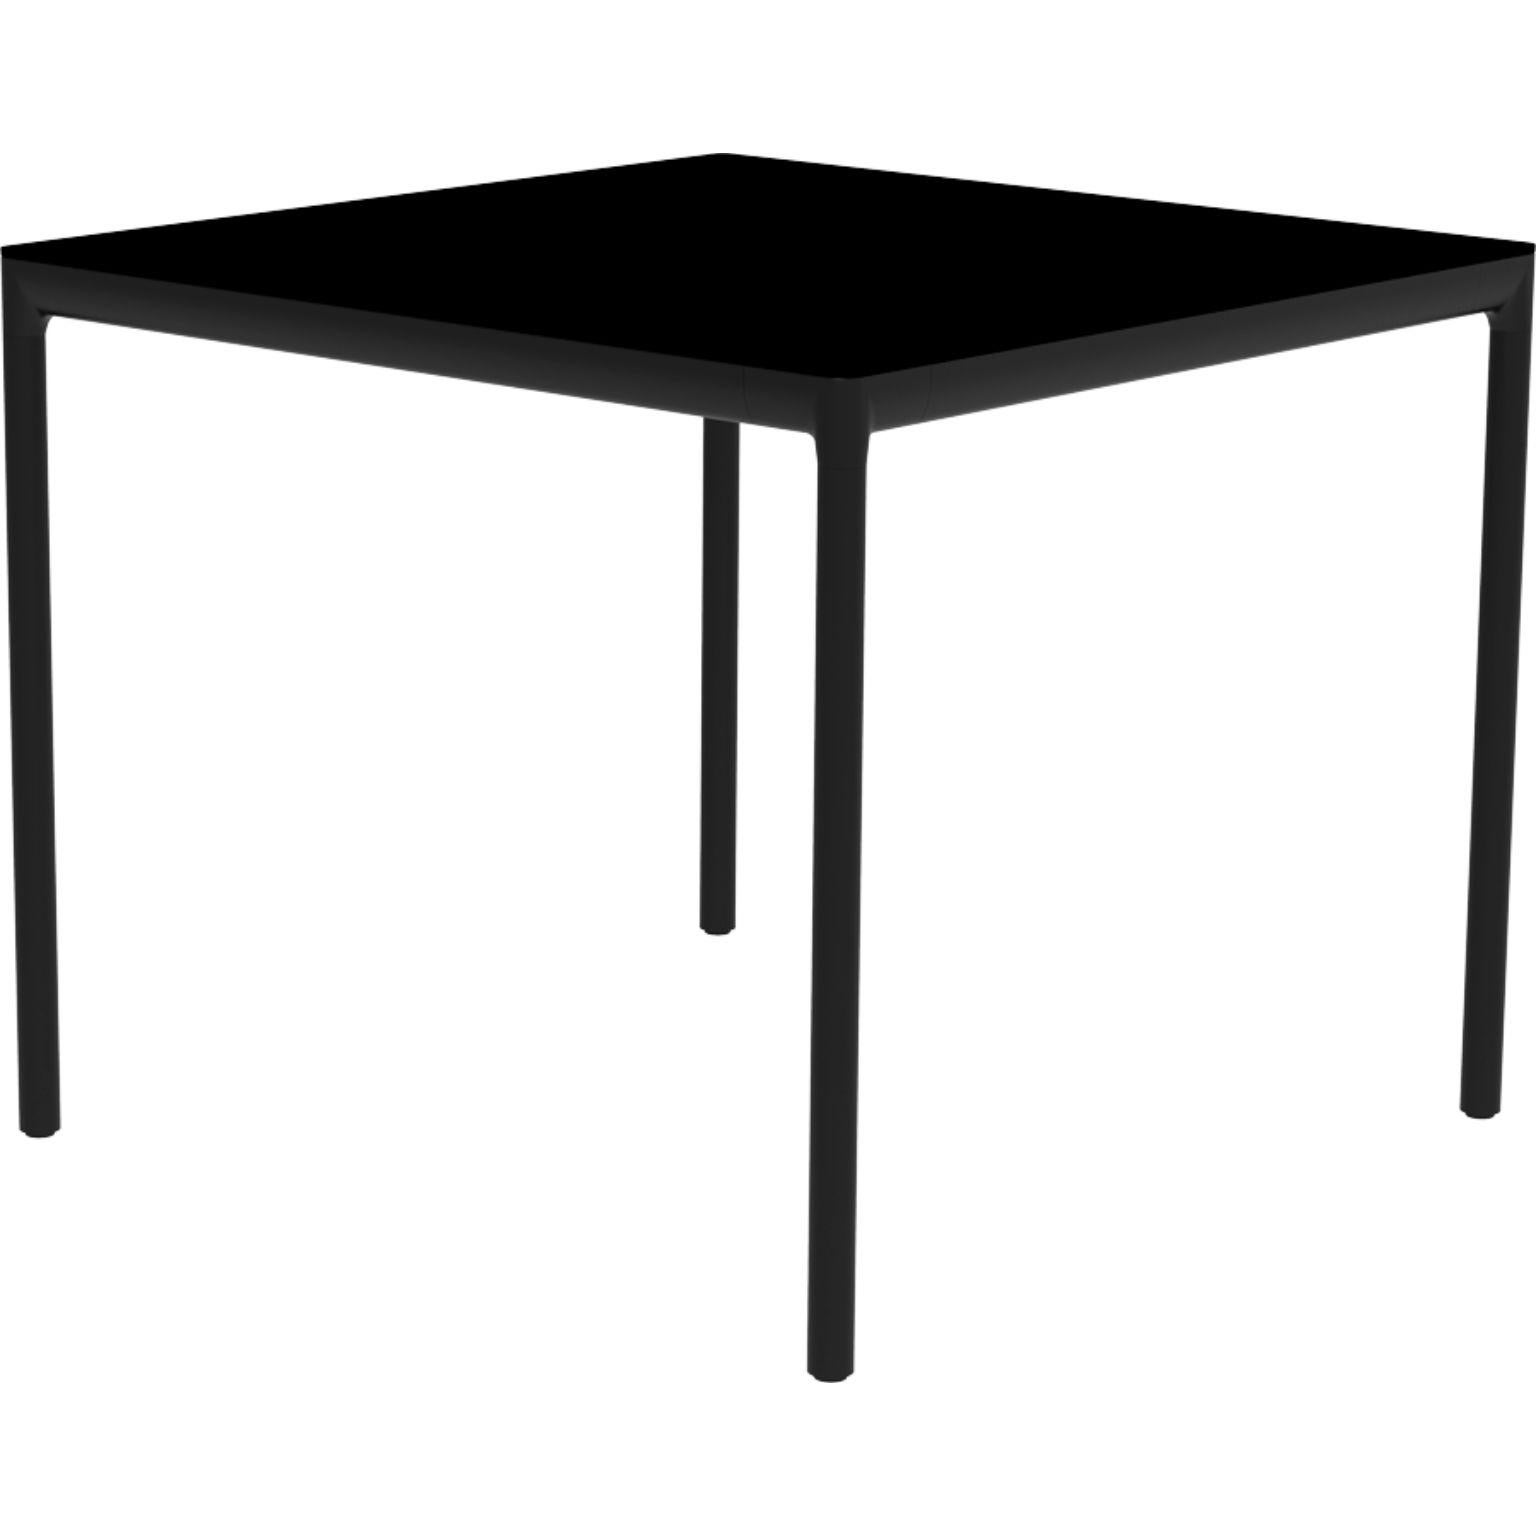 Ribbons black 90 table by MOWEE.
Dimensions: D90 x W90 x H75 cm.
Material: Aluminum and HPL top.
Weight: 16 kg.
Also available in different colors and finishes. (HPL Black Edge or Neolith top). 

An unmistakable collection for its beauty and